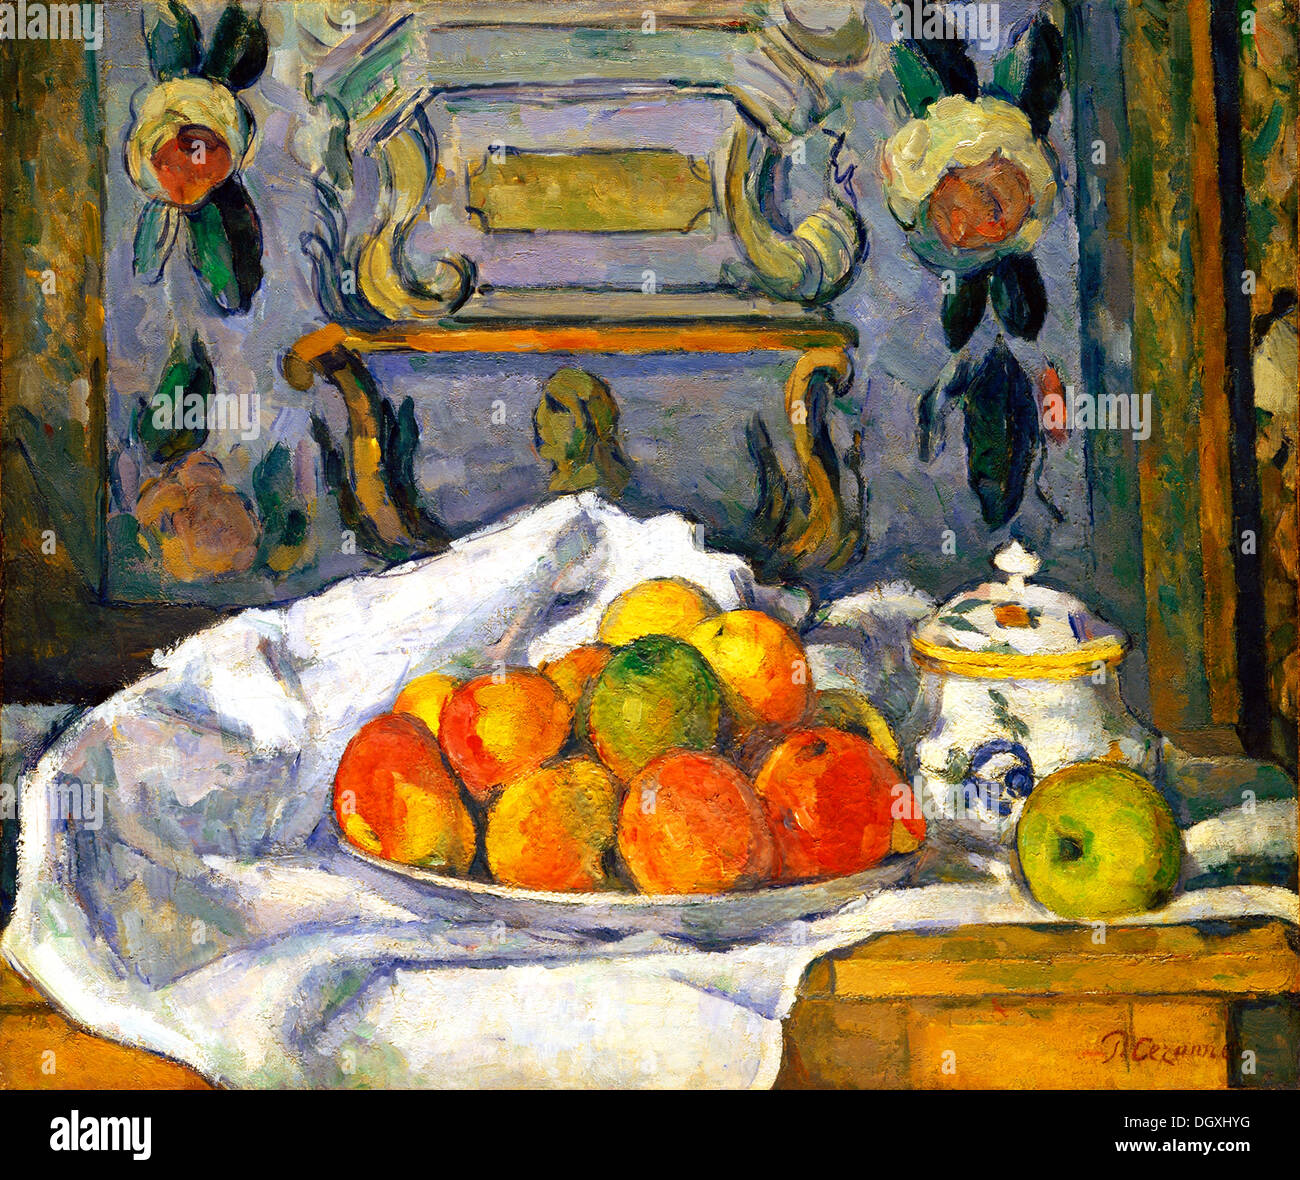 Still Life: Dish of Apples - by Paul Cézanne, 1877 Stock Photo